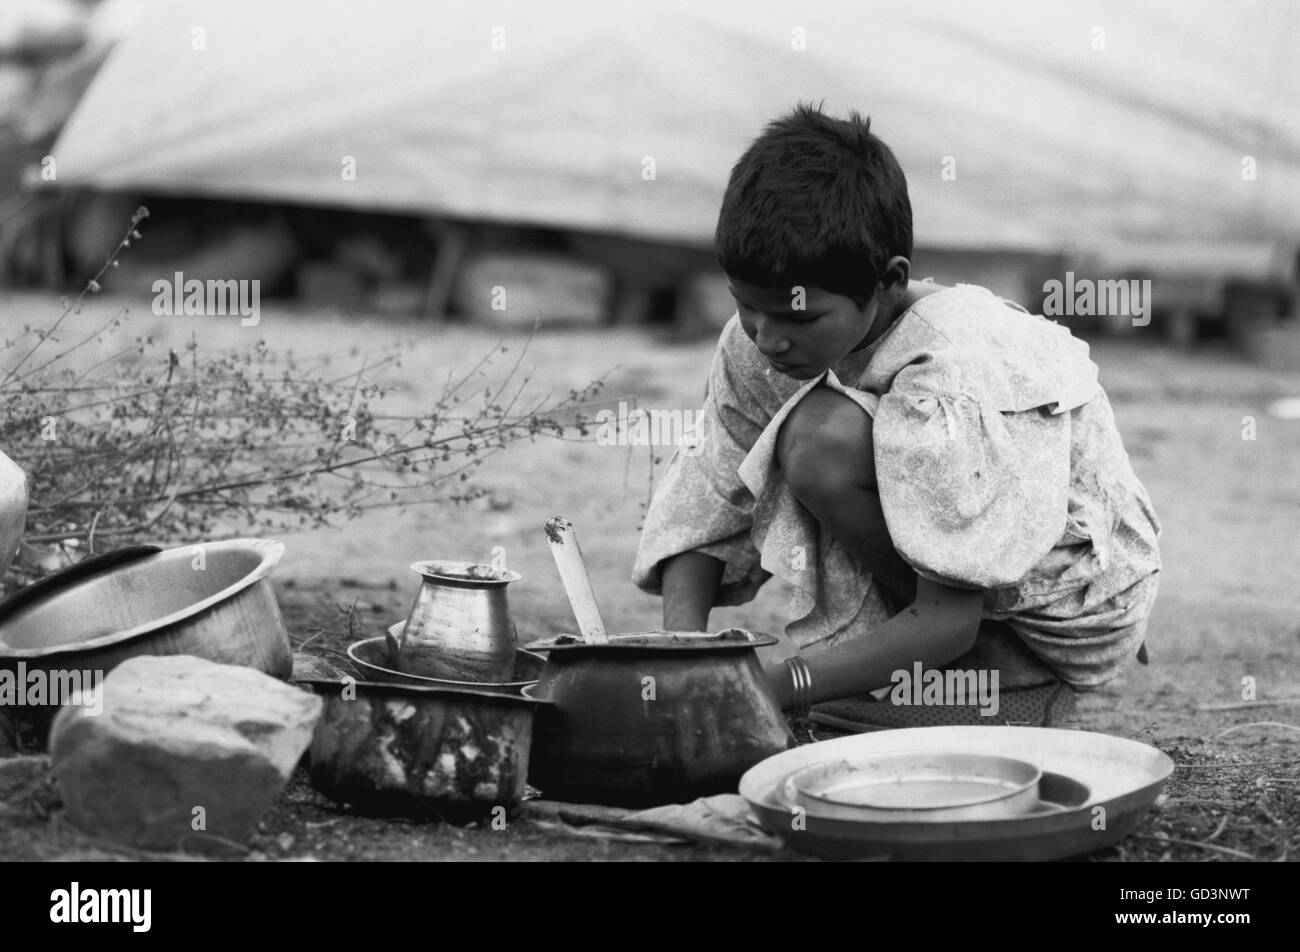 Poor boy Black and White Stock Photos & Images - Alamy